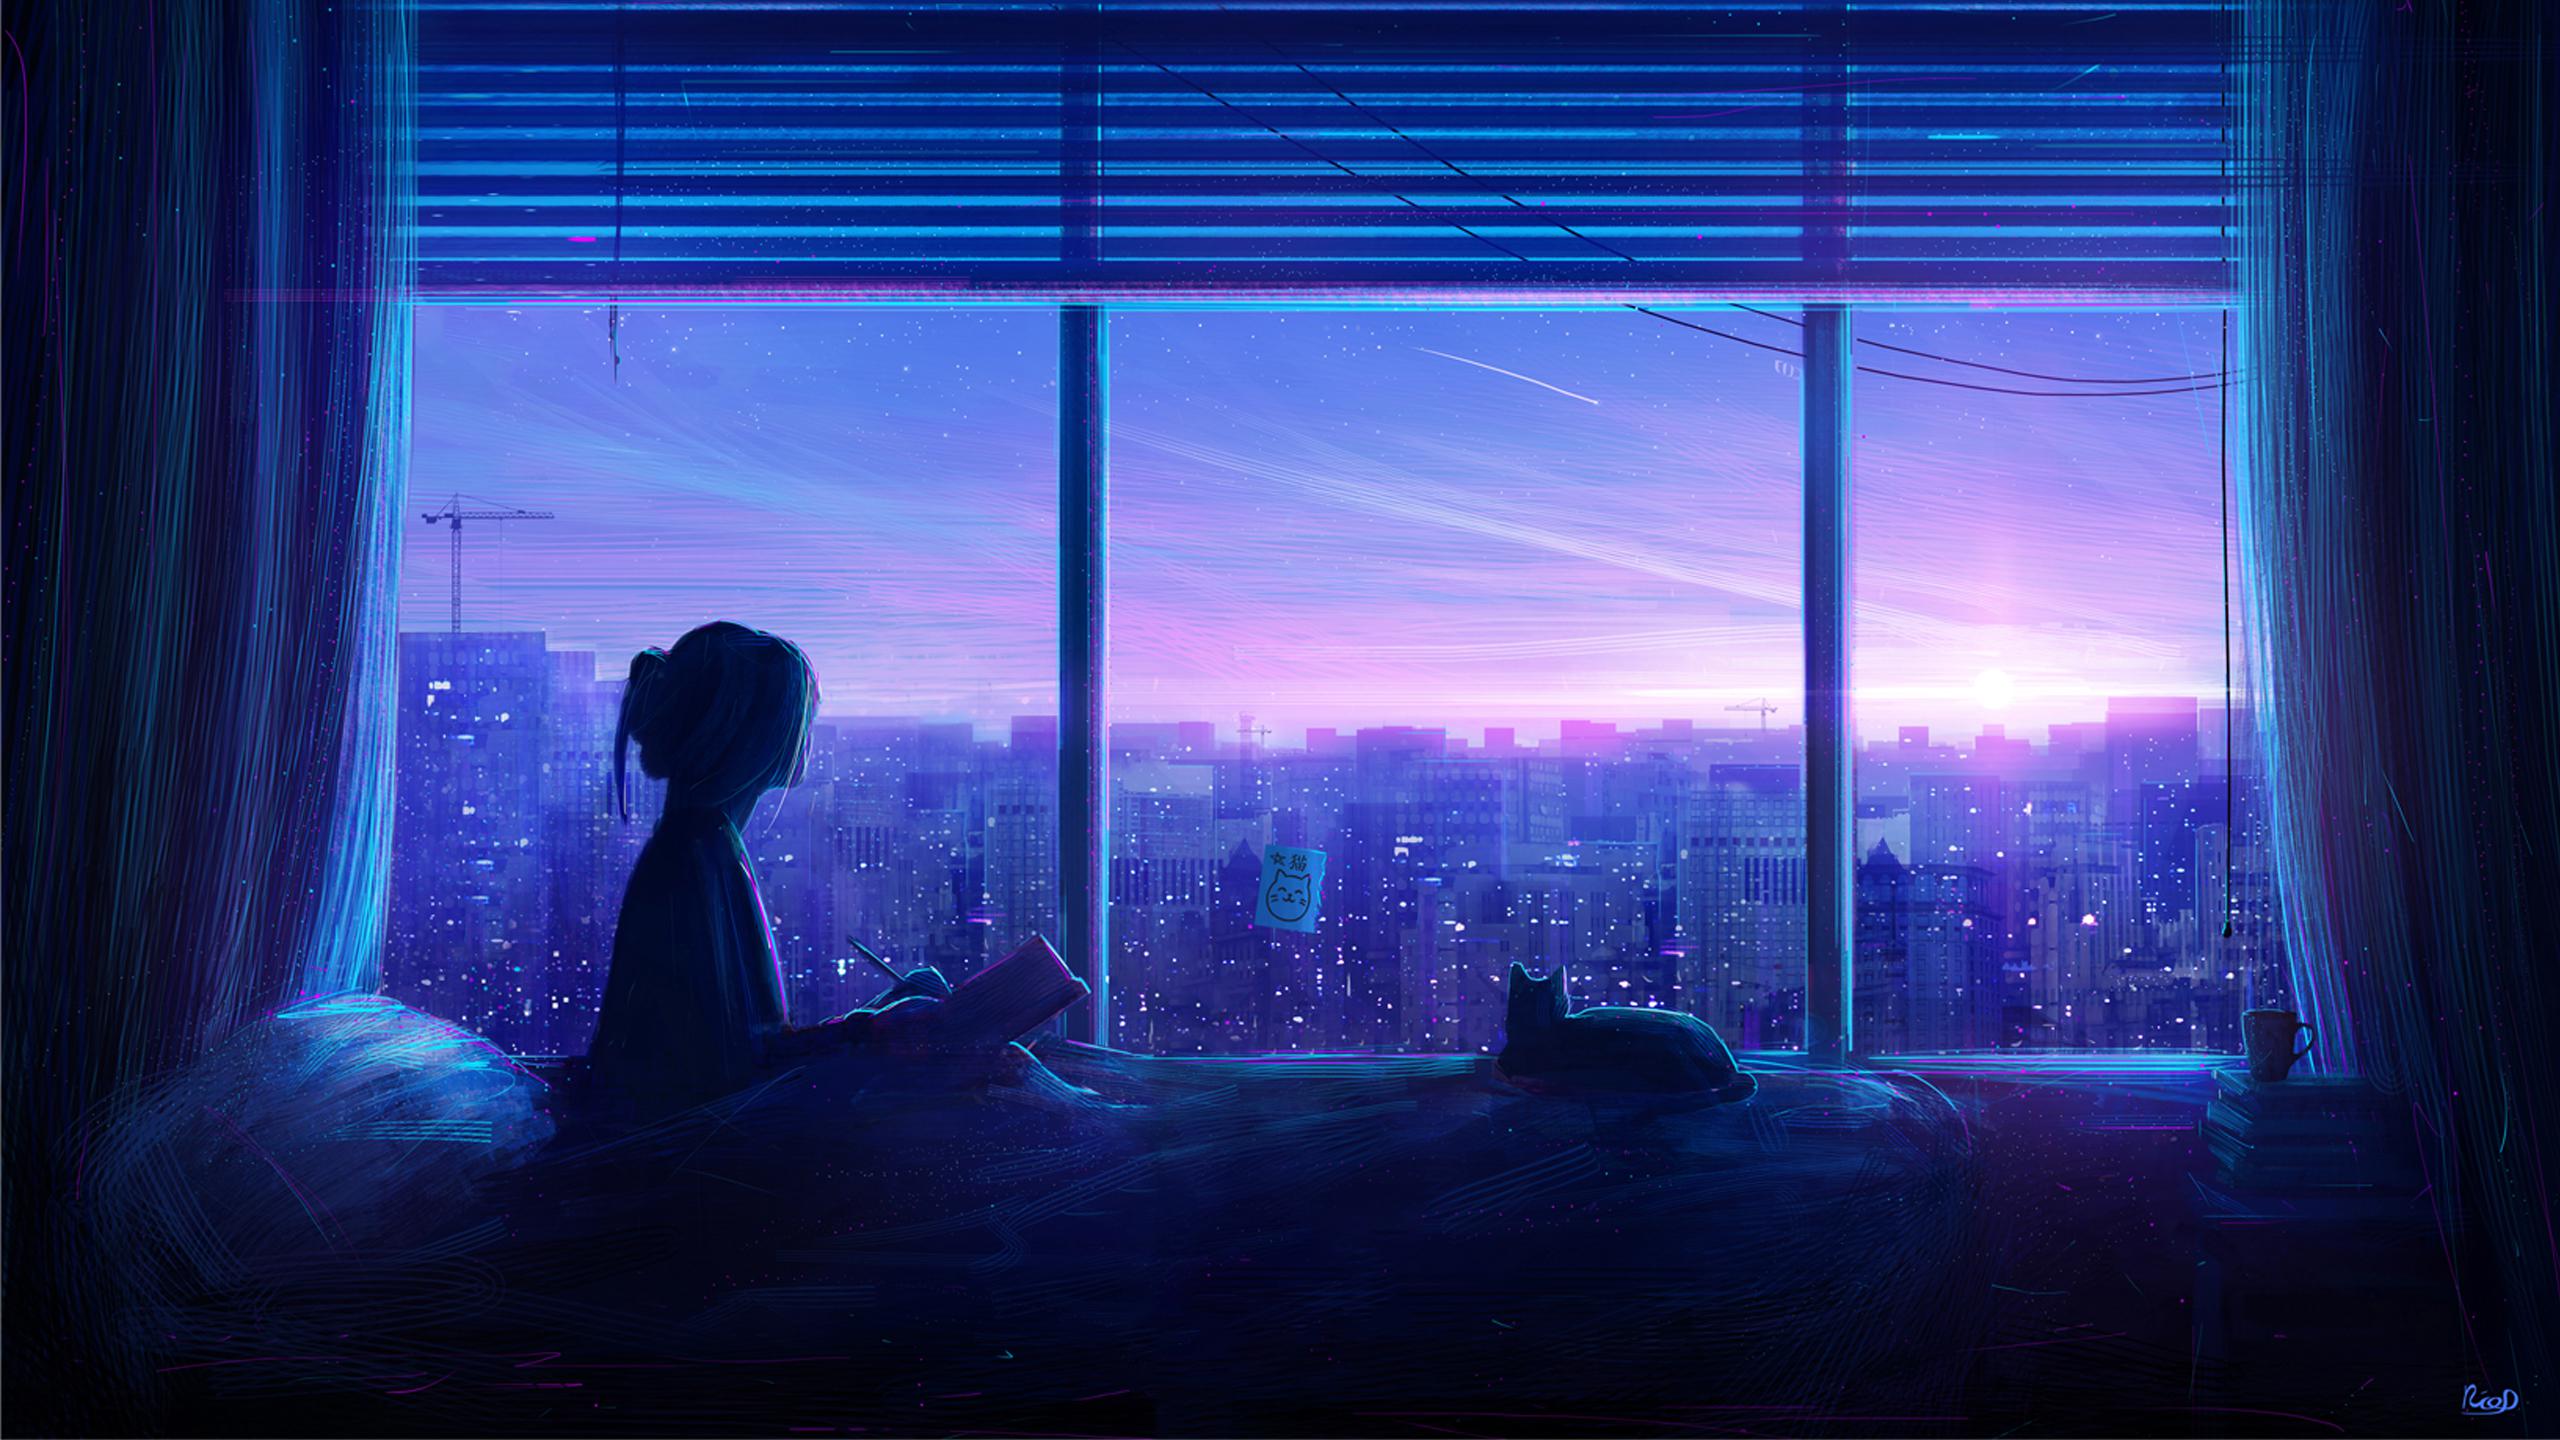 A woman and her cat watch the sunset over the city from the comfort of their home. - 2560x1440